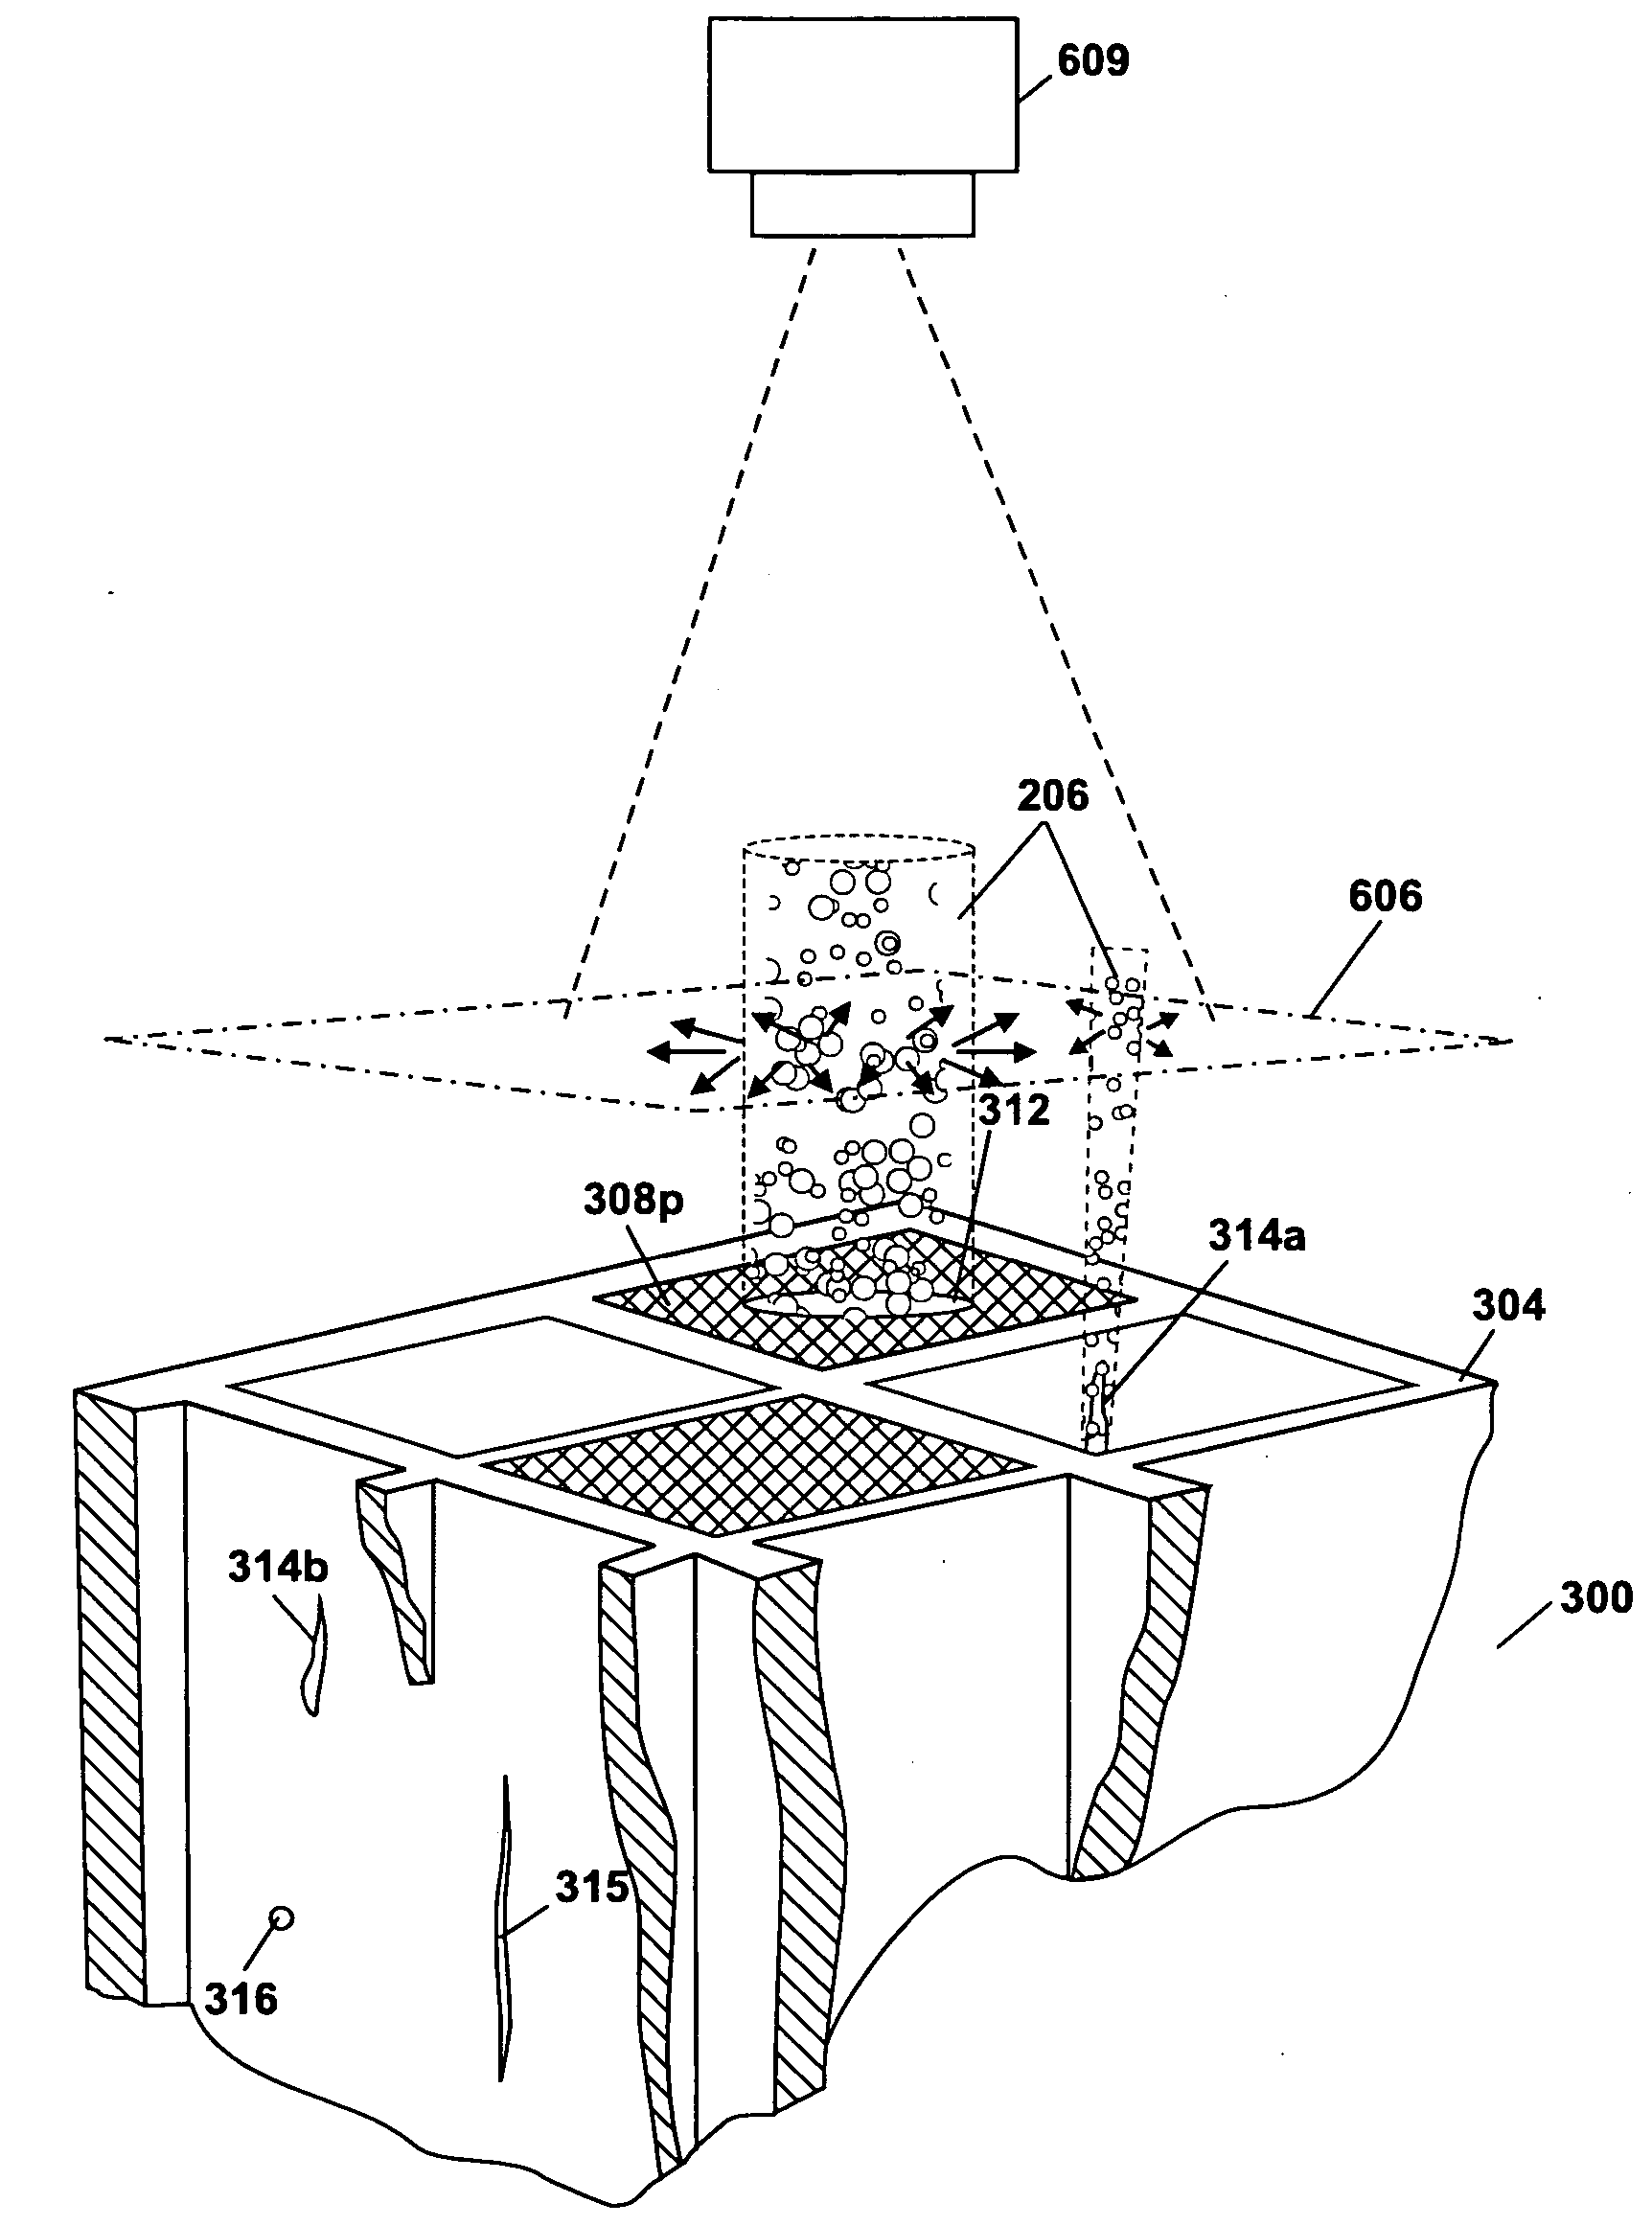 Method, system and apparatus for detecting defects in a honeycomb body using a particulate fluid